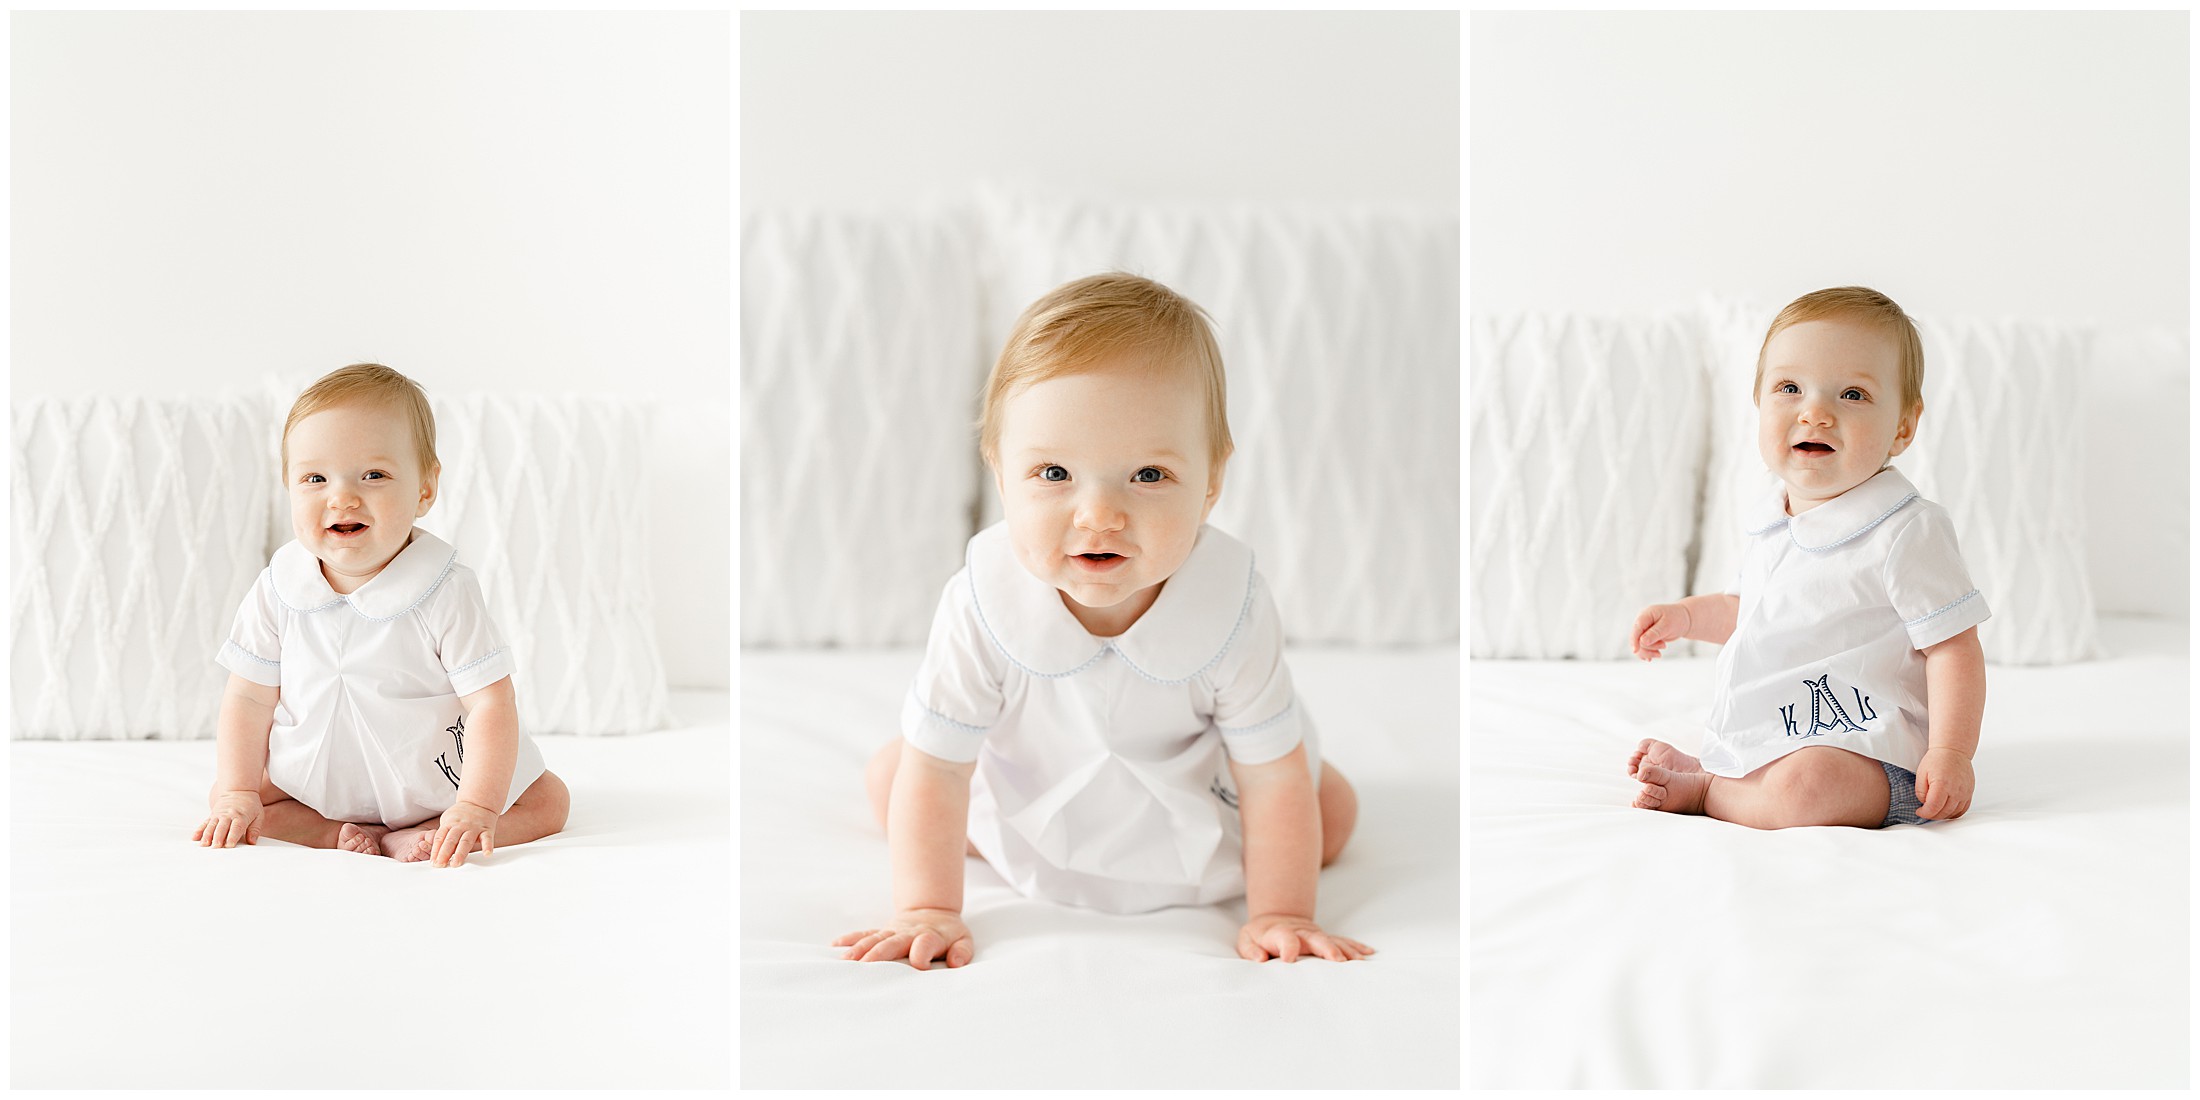 Three photos of a baby sitting for portraits.